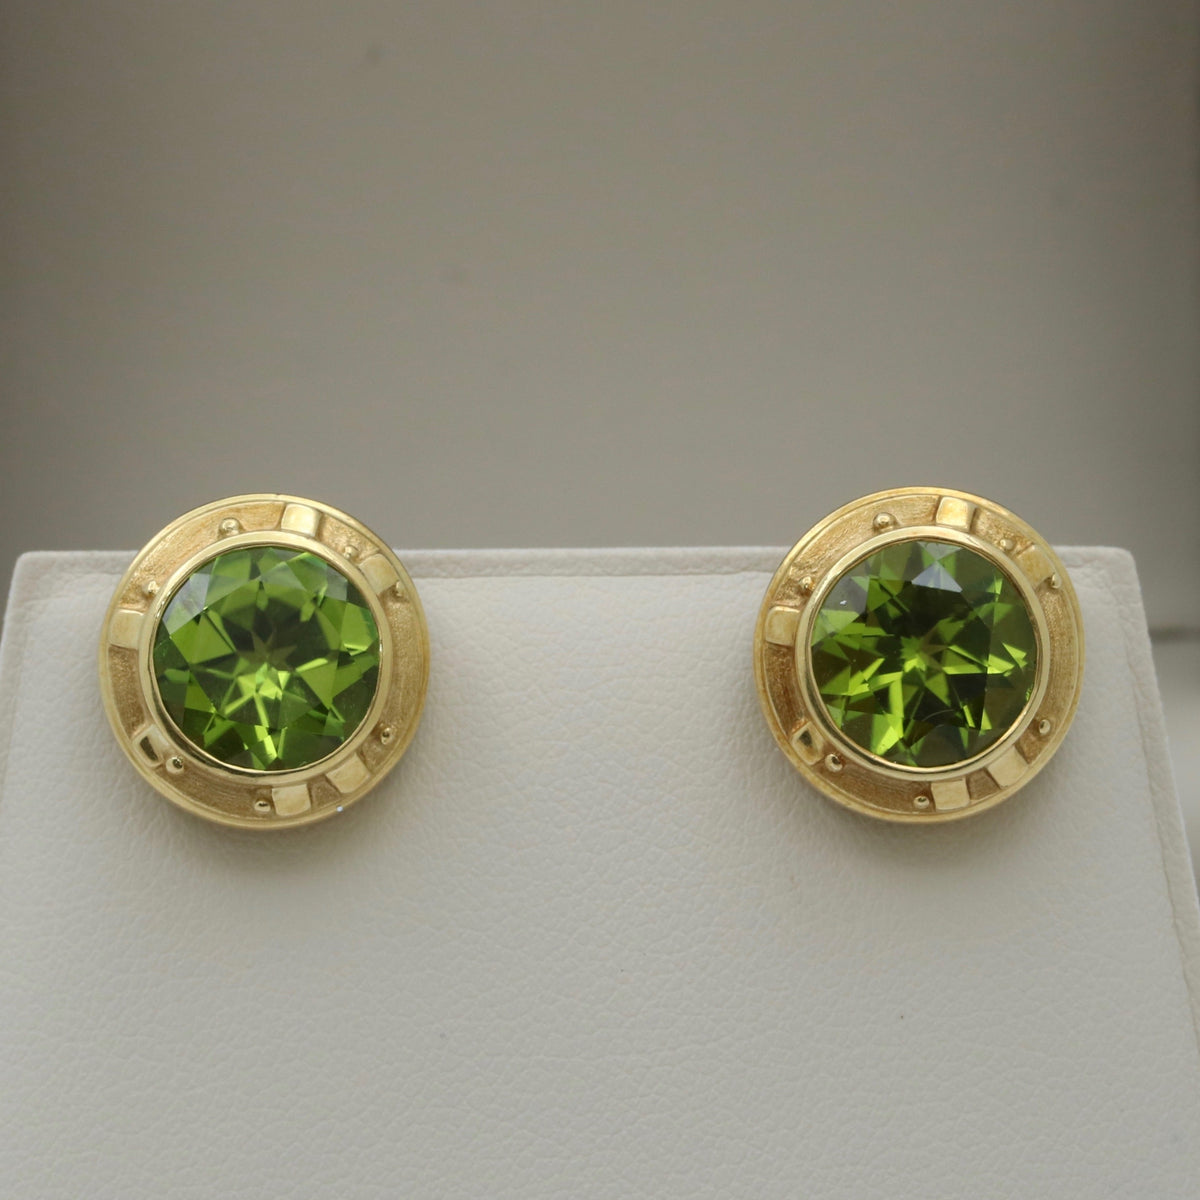 Vintage 9 Carat Natural Peridot and 18K Gold Earrings